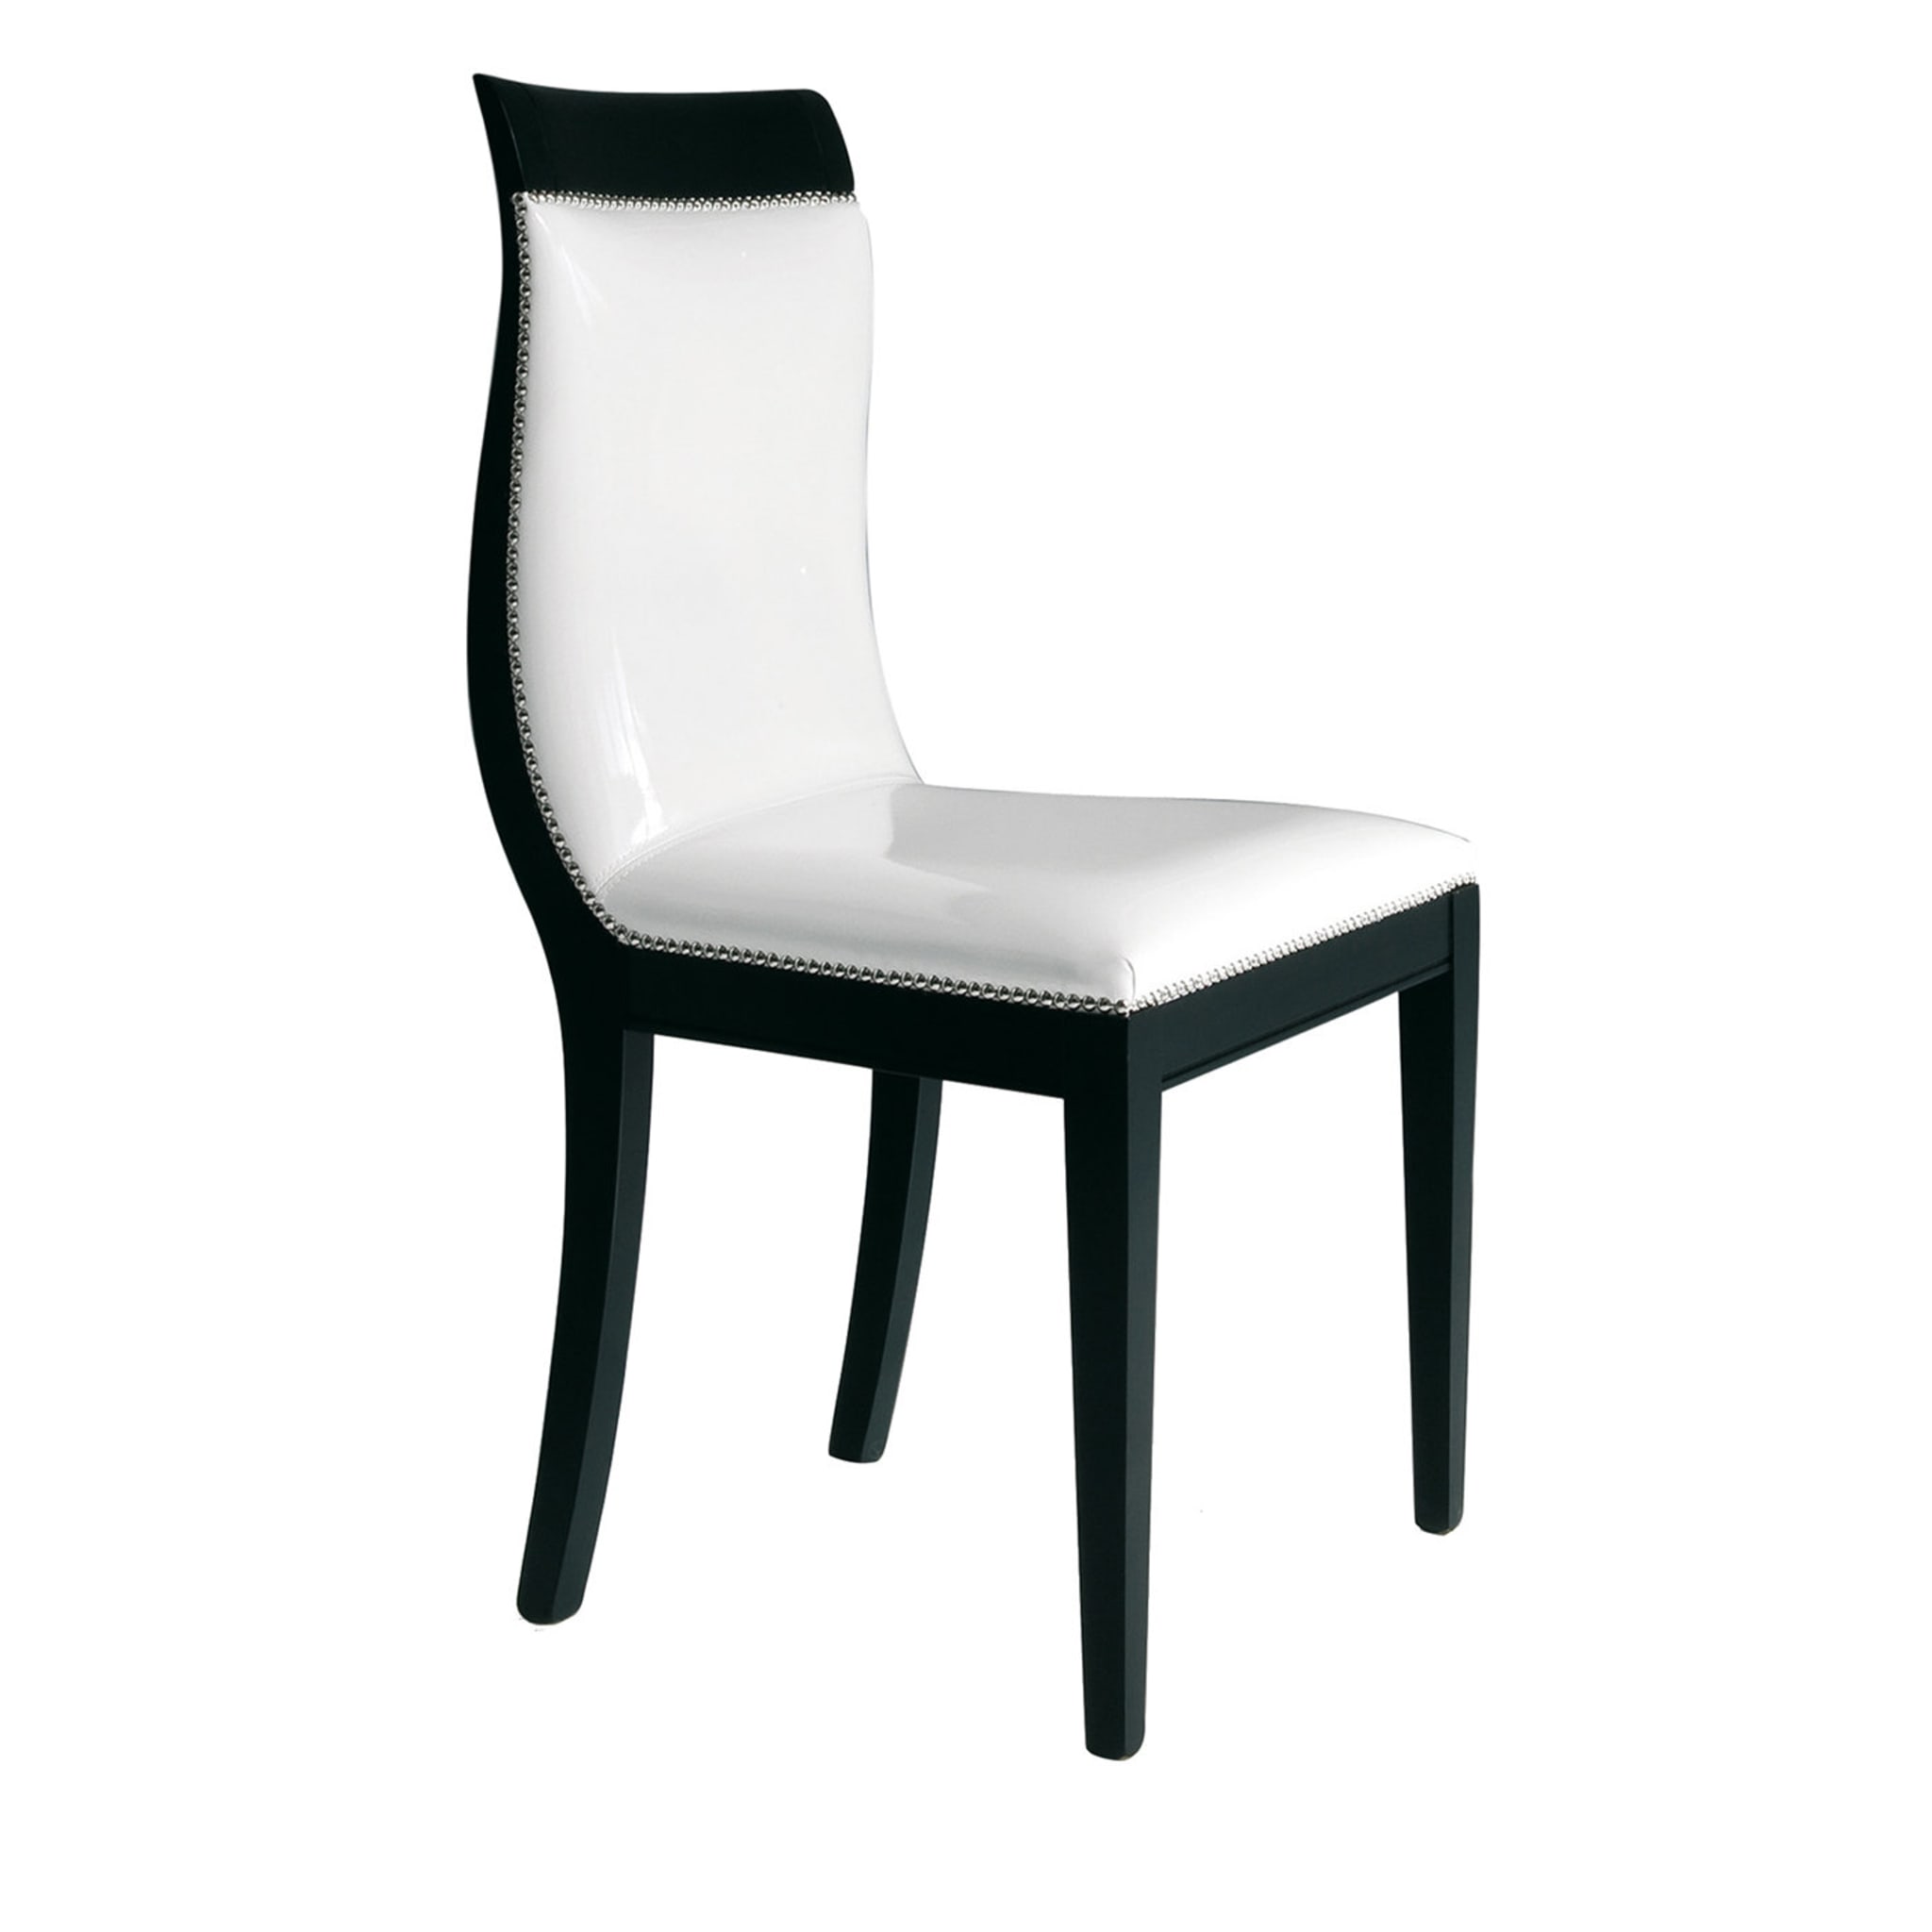 Set of 2 Black-And-White Chairs #2 - Main view